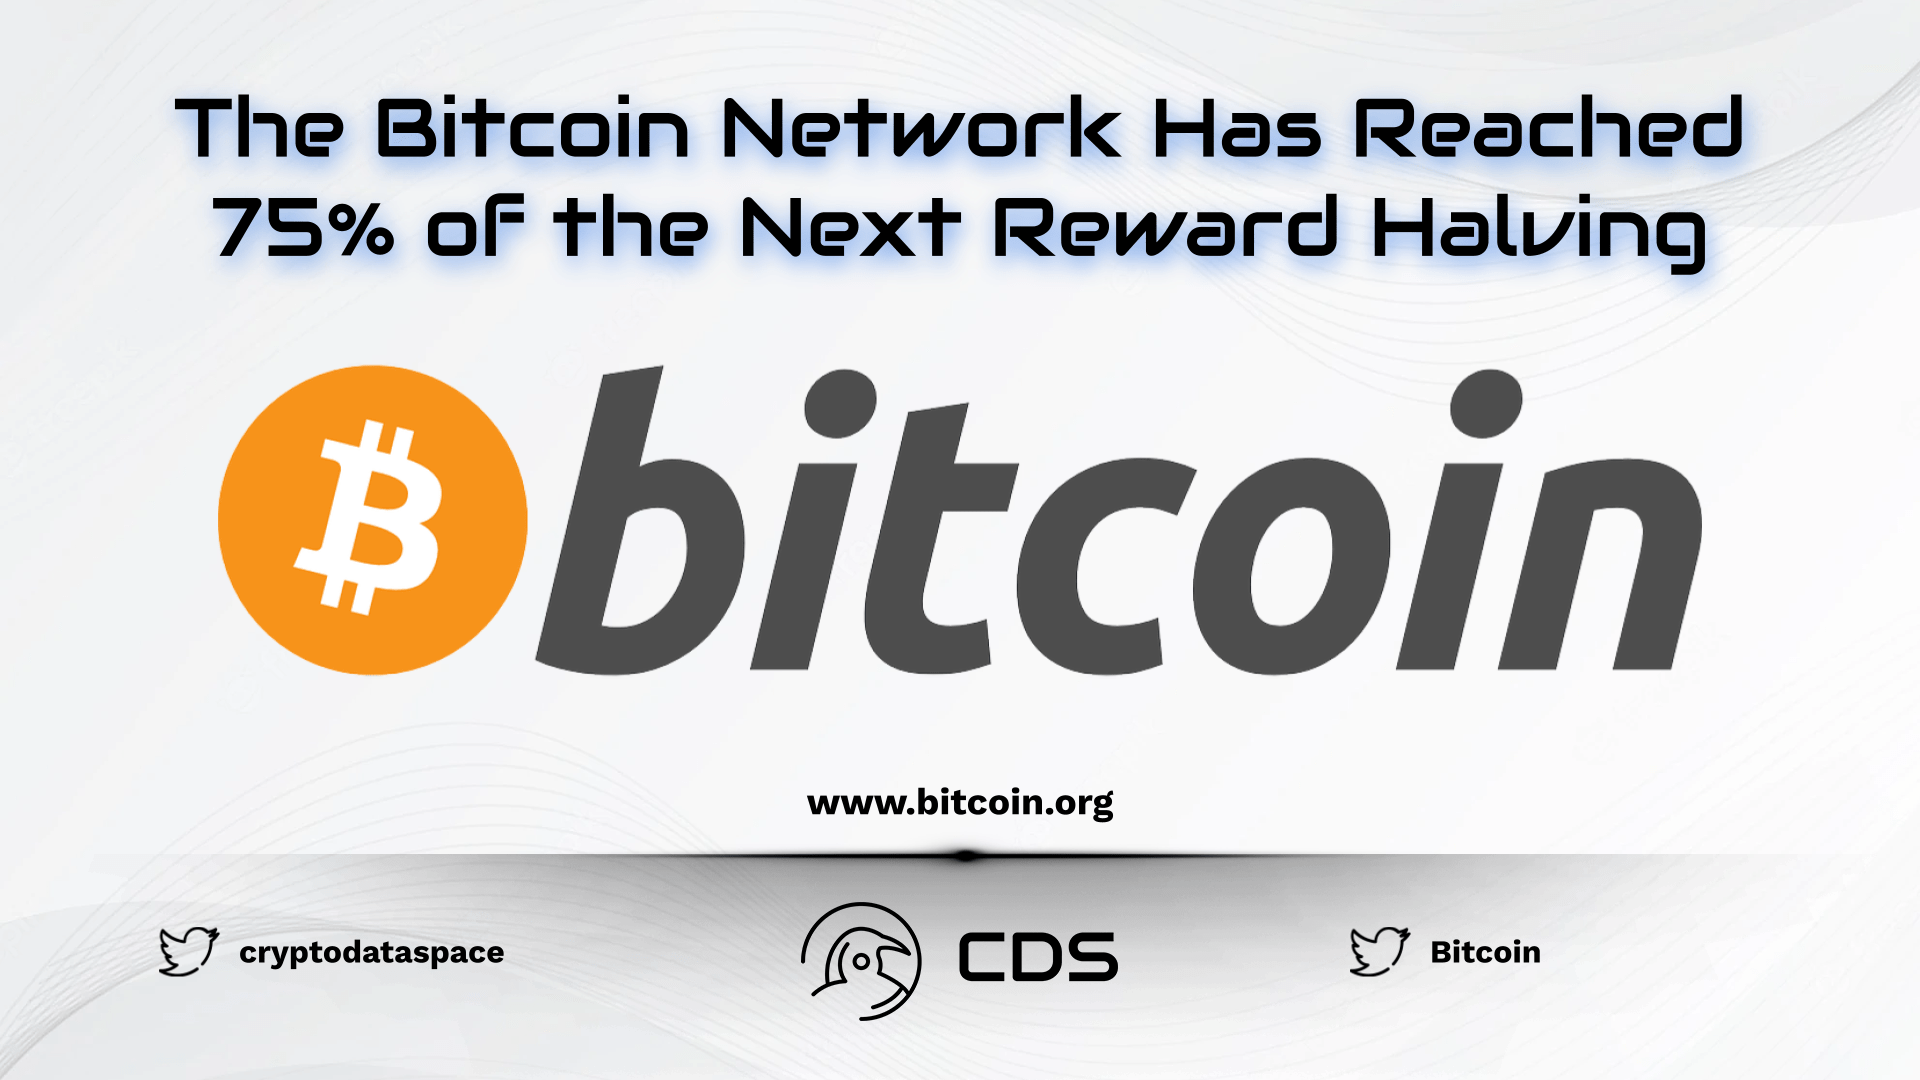 The Bitcoin Network Has Reached 75% of the Next Reward Halving